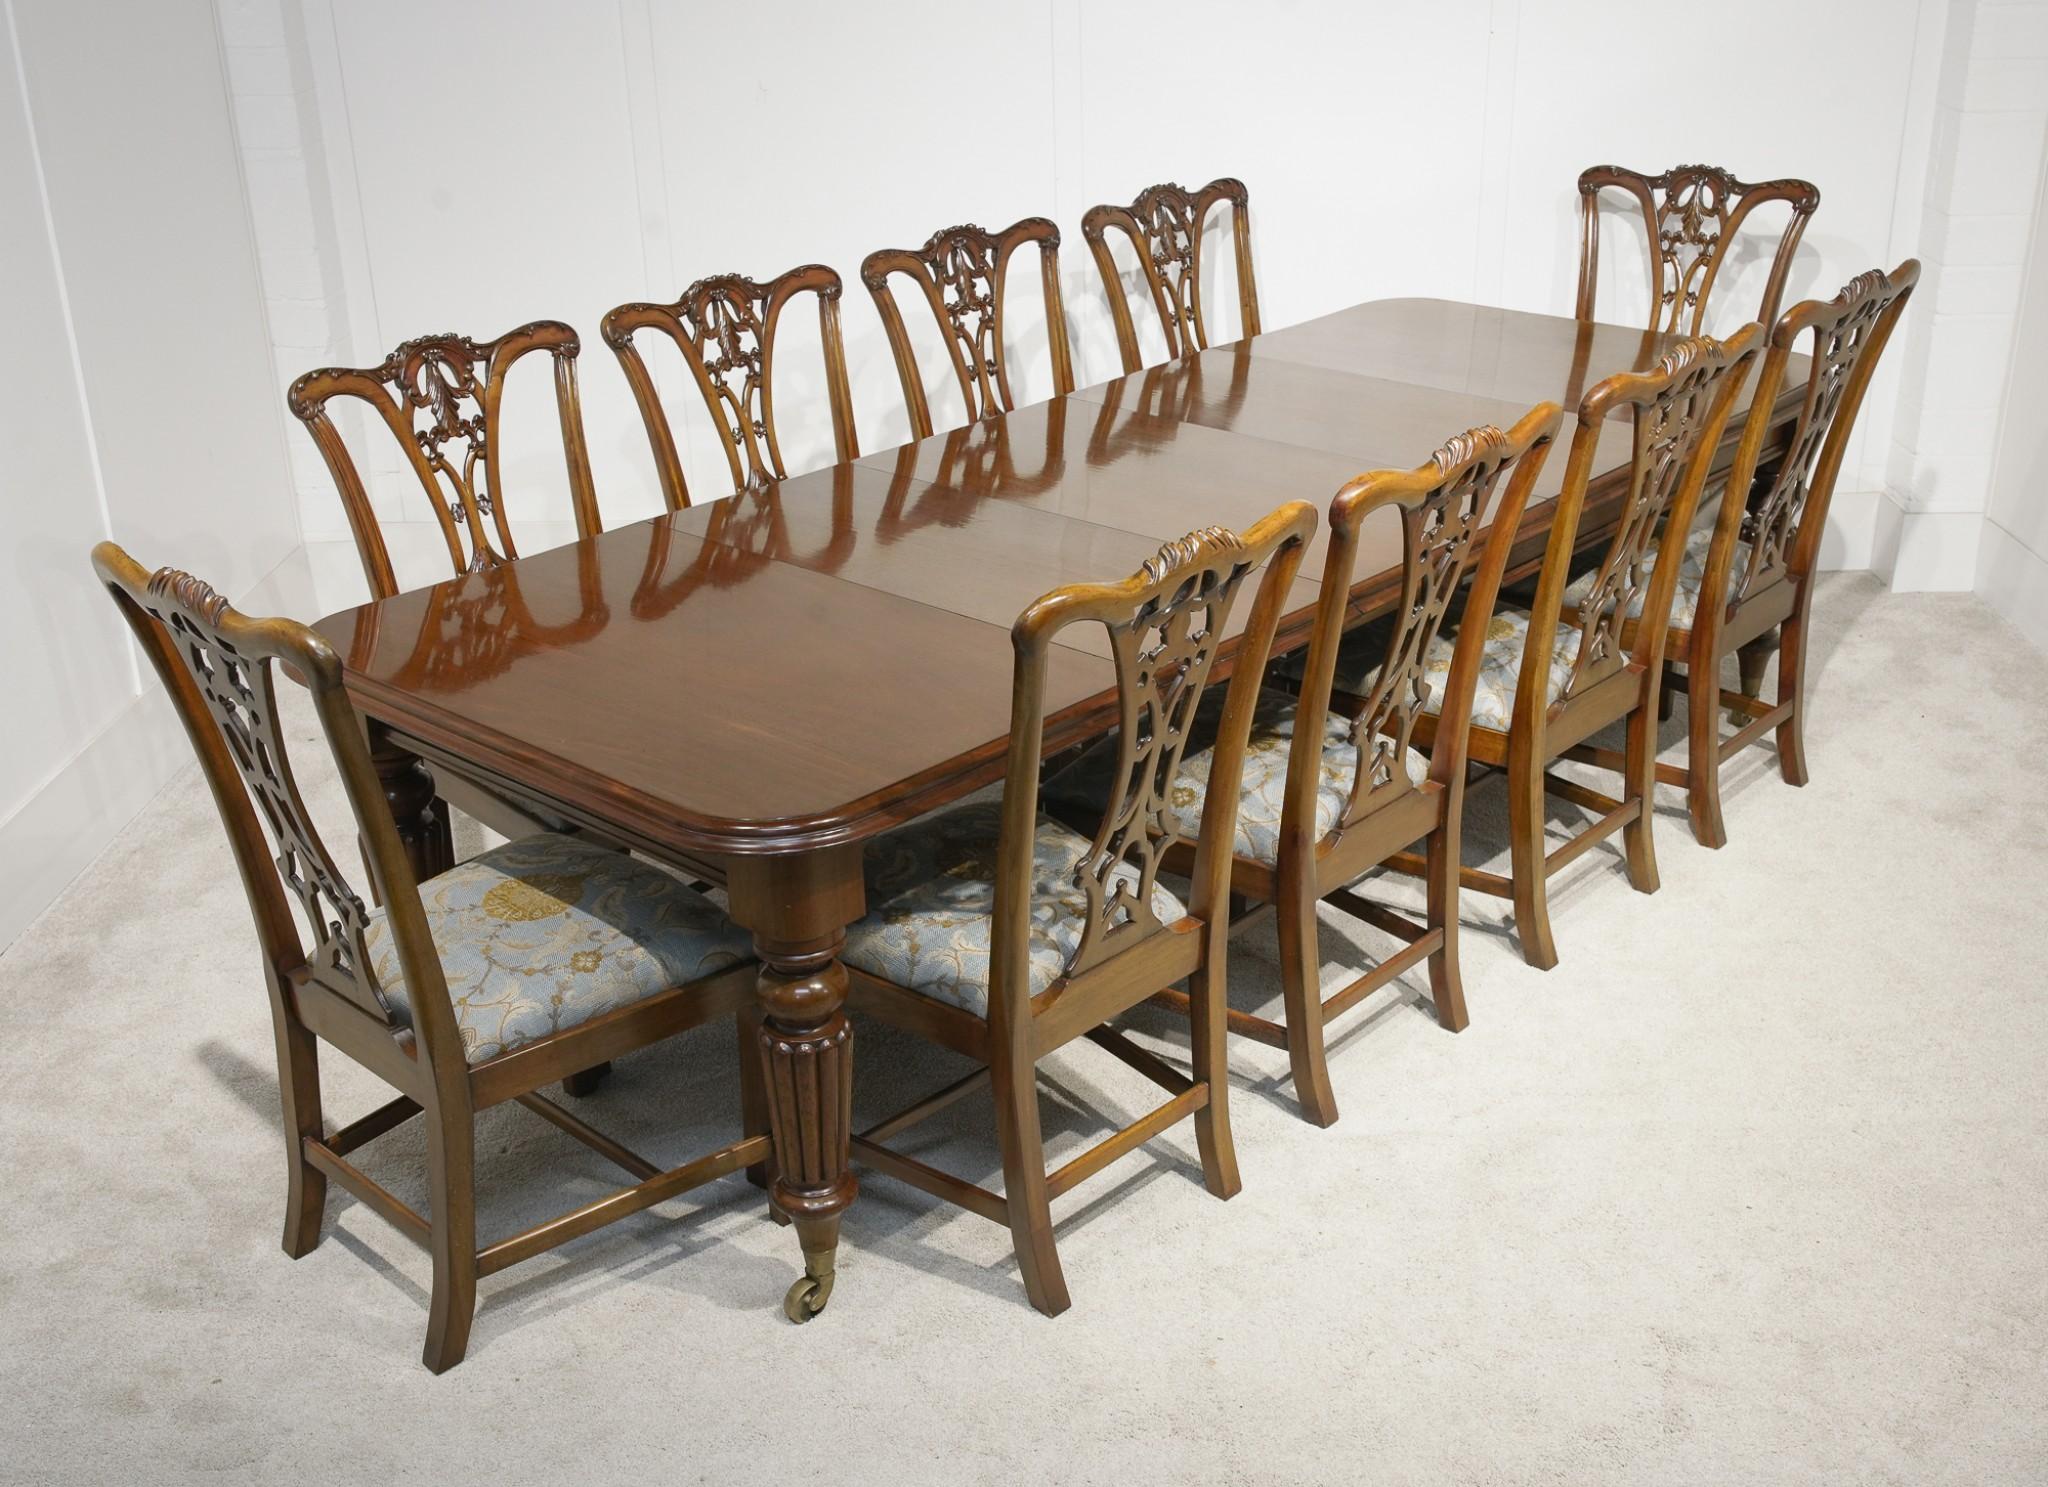 Glorious dining set consiting of a Victorian revival dining table and a matching set of Chippendale chairs
The table extends via three leaves in the middle so various size combinations
Eating together whether with family or friends is the